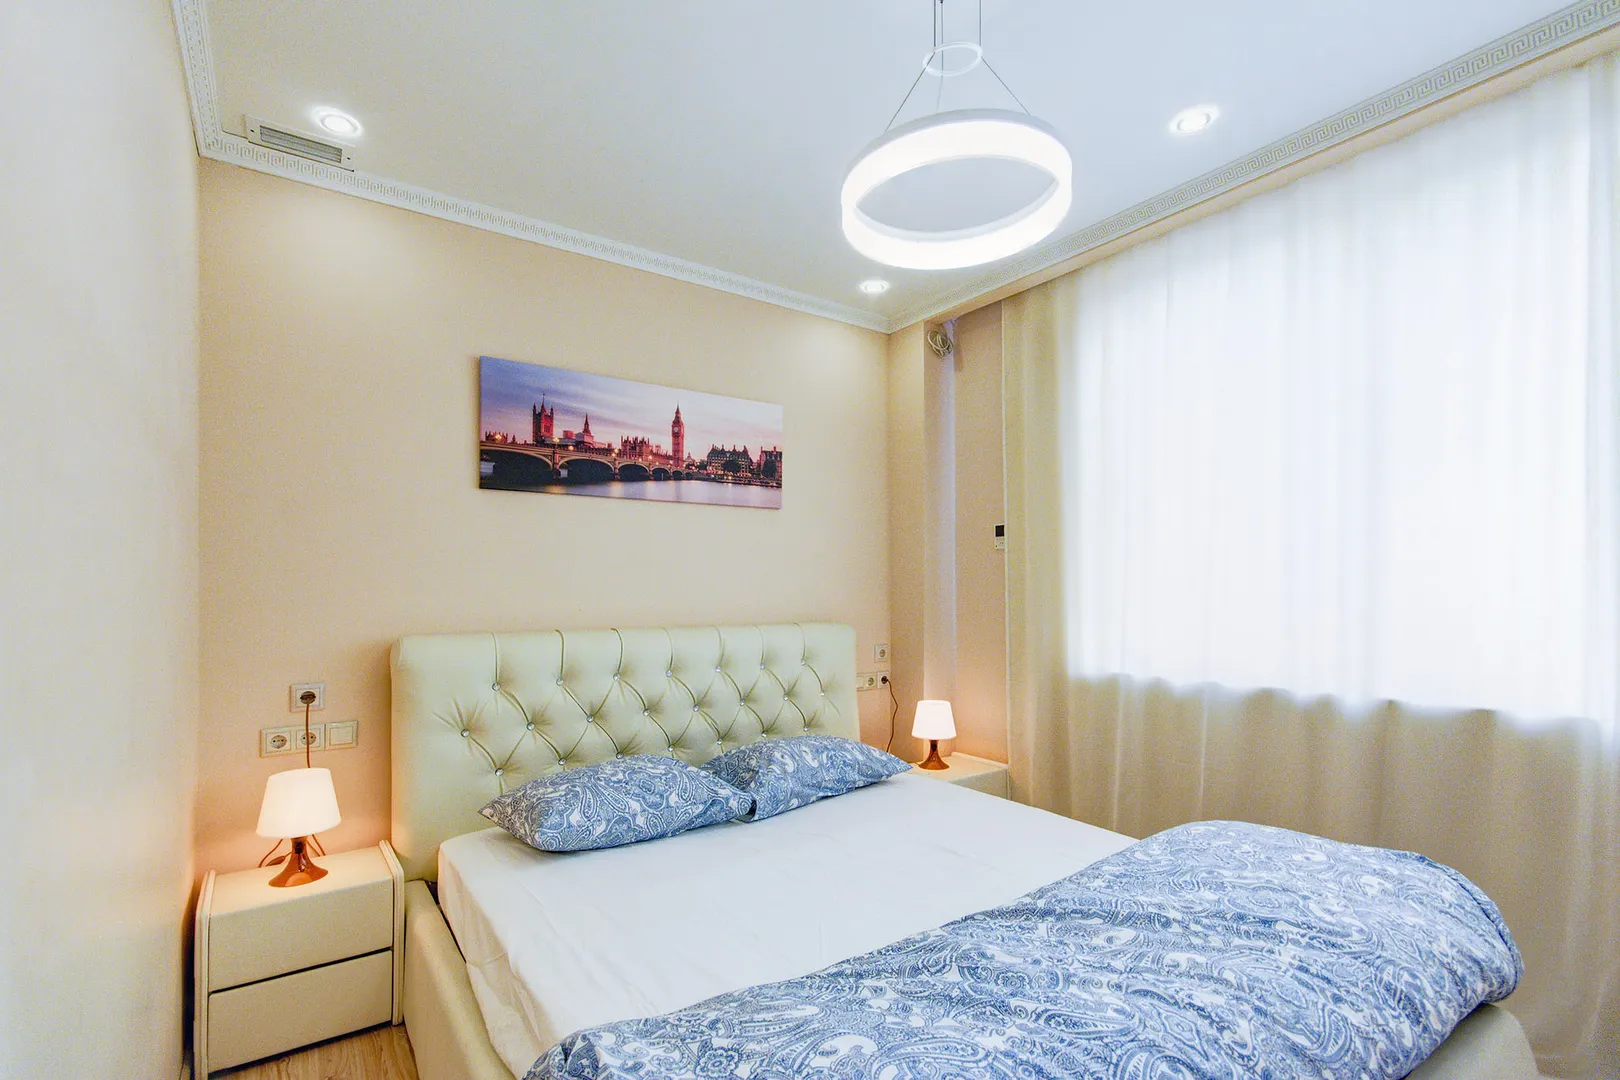 2nd bedroom with 1 queen-sized beds 1,6м  2й Спальни с 1 кровати 1,6м